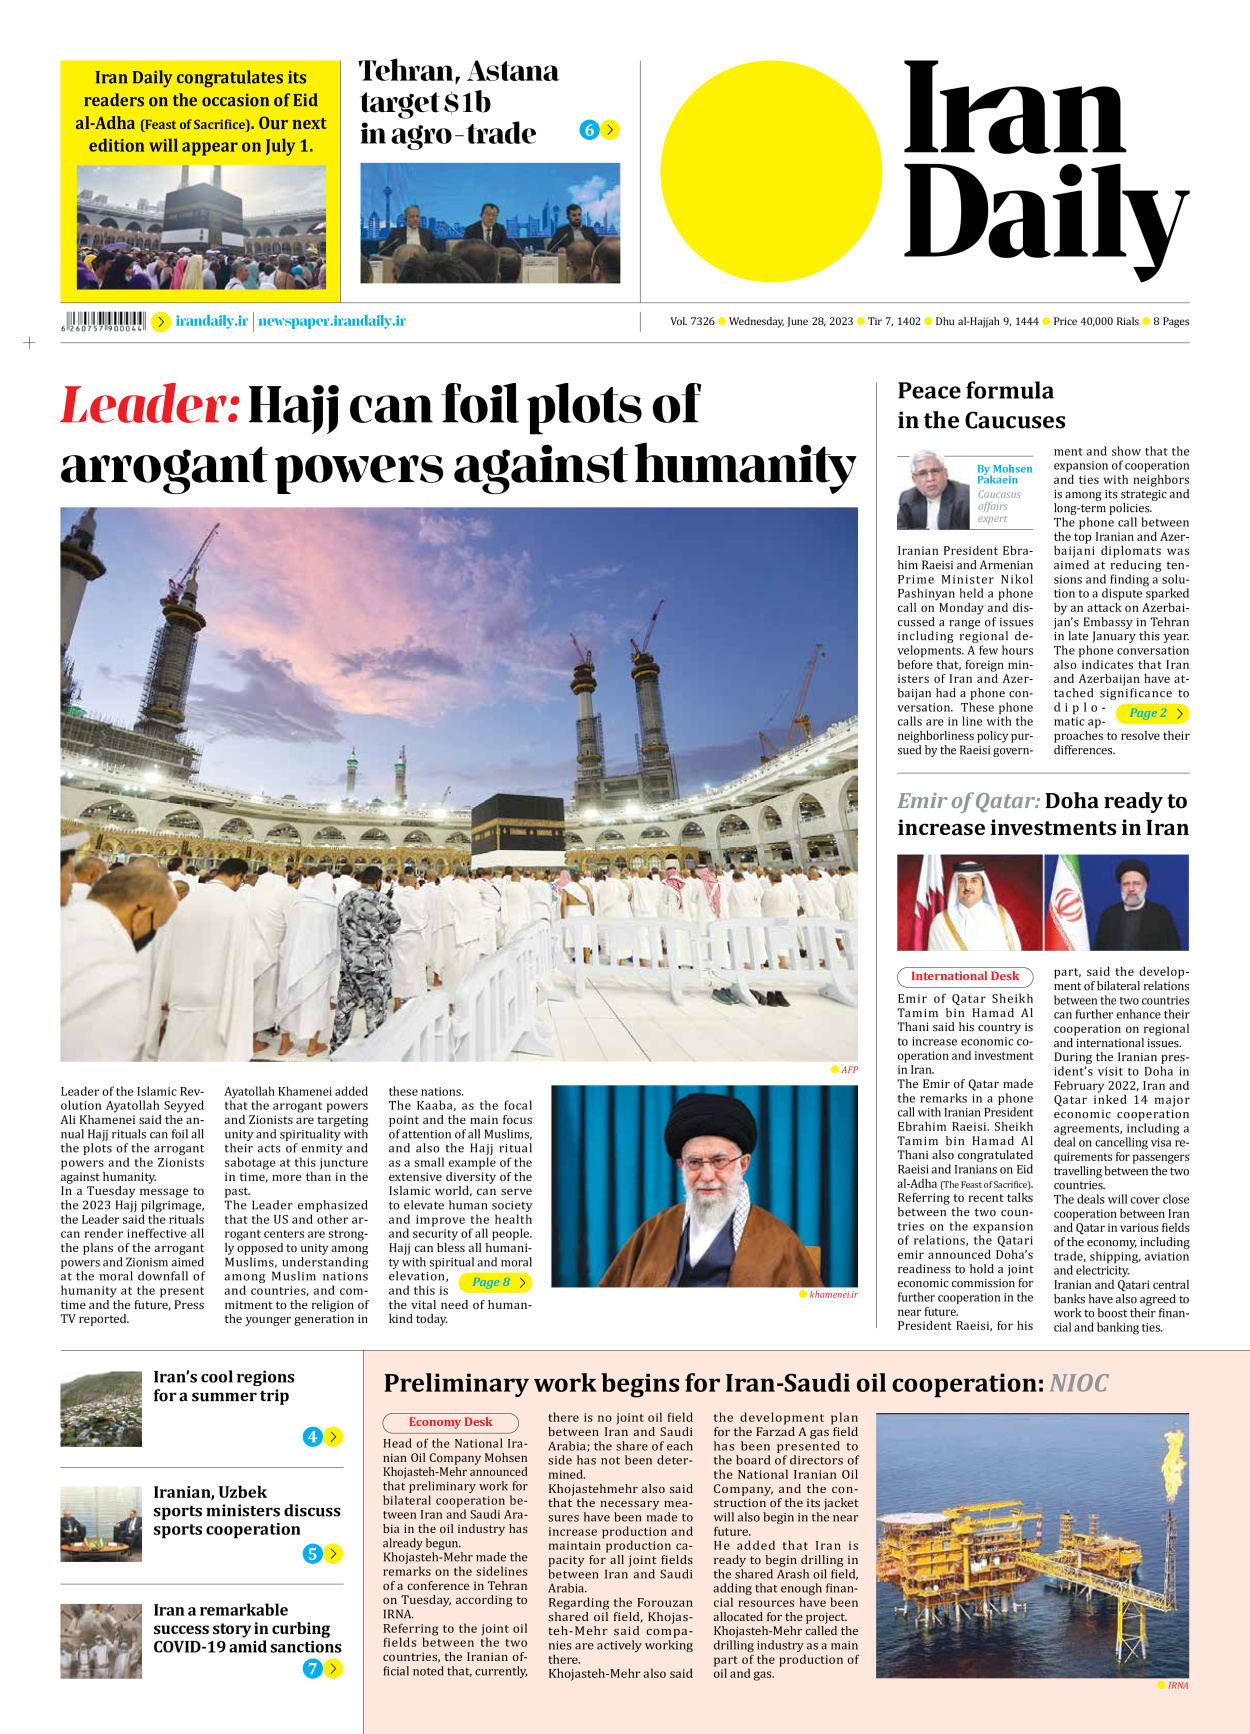 Iran Daily - Number Seven Thousand Three Hundred and Twenty Six - 28 June 2023 - Page 1